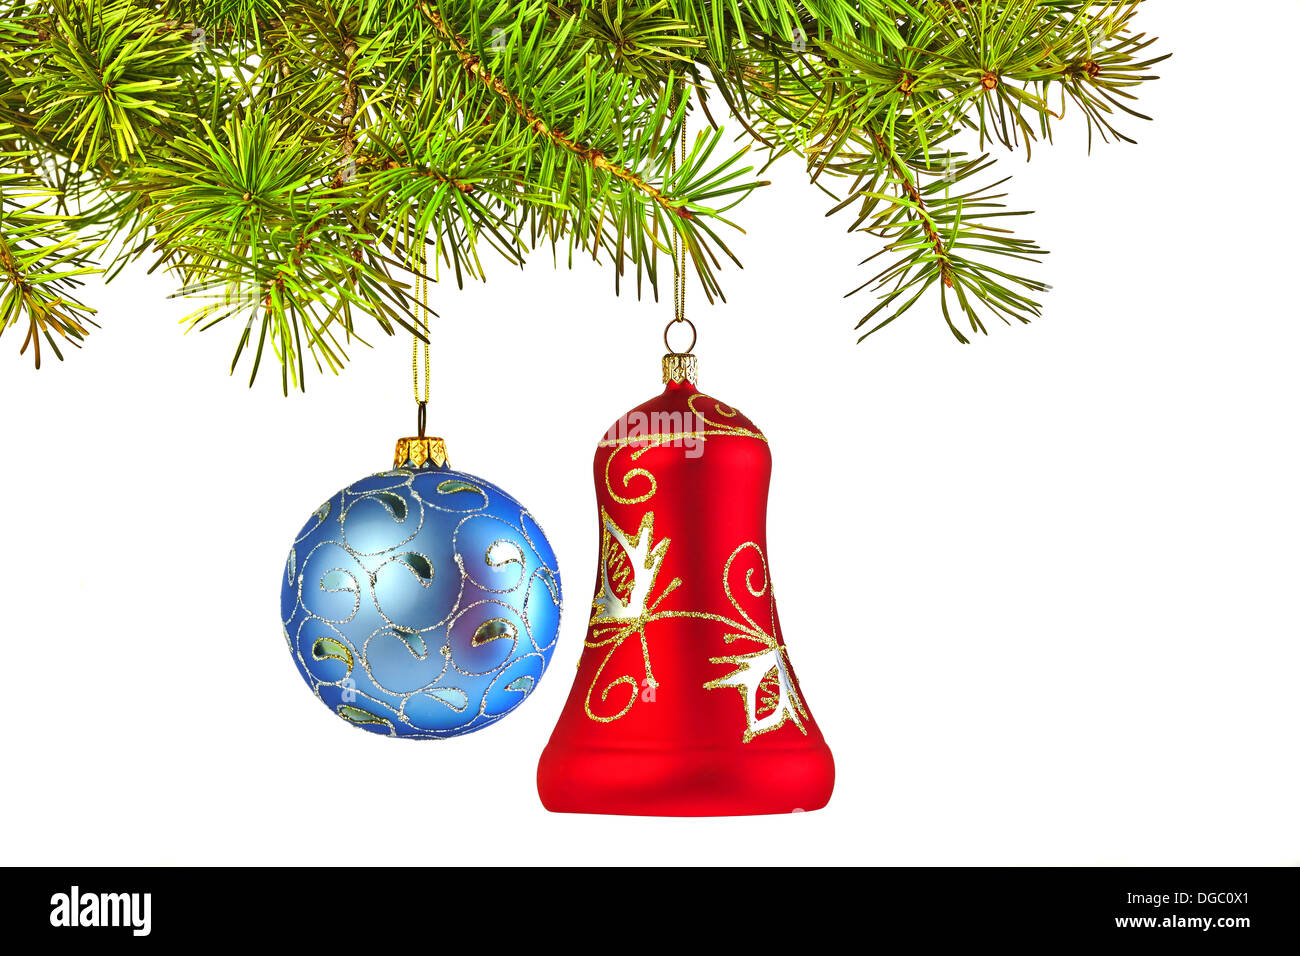 Christmas decoration-glass red bell and blue ball on fir branche Stock Photo